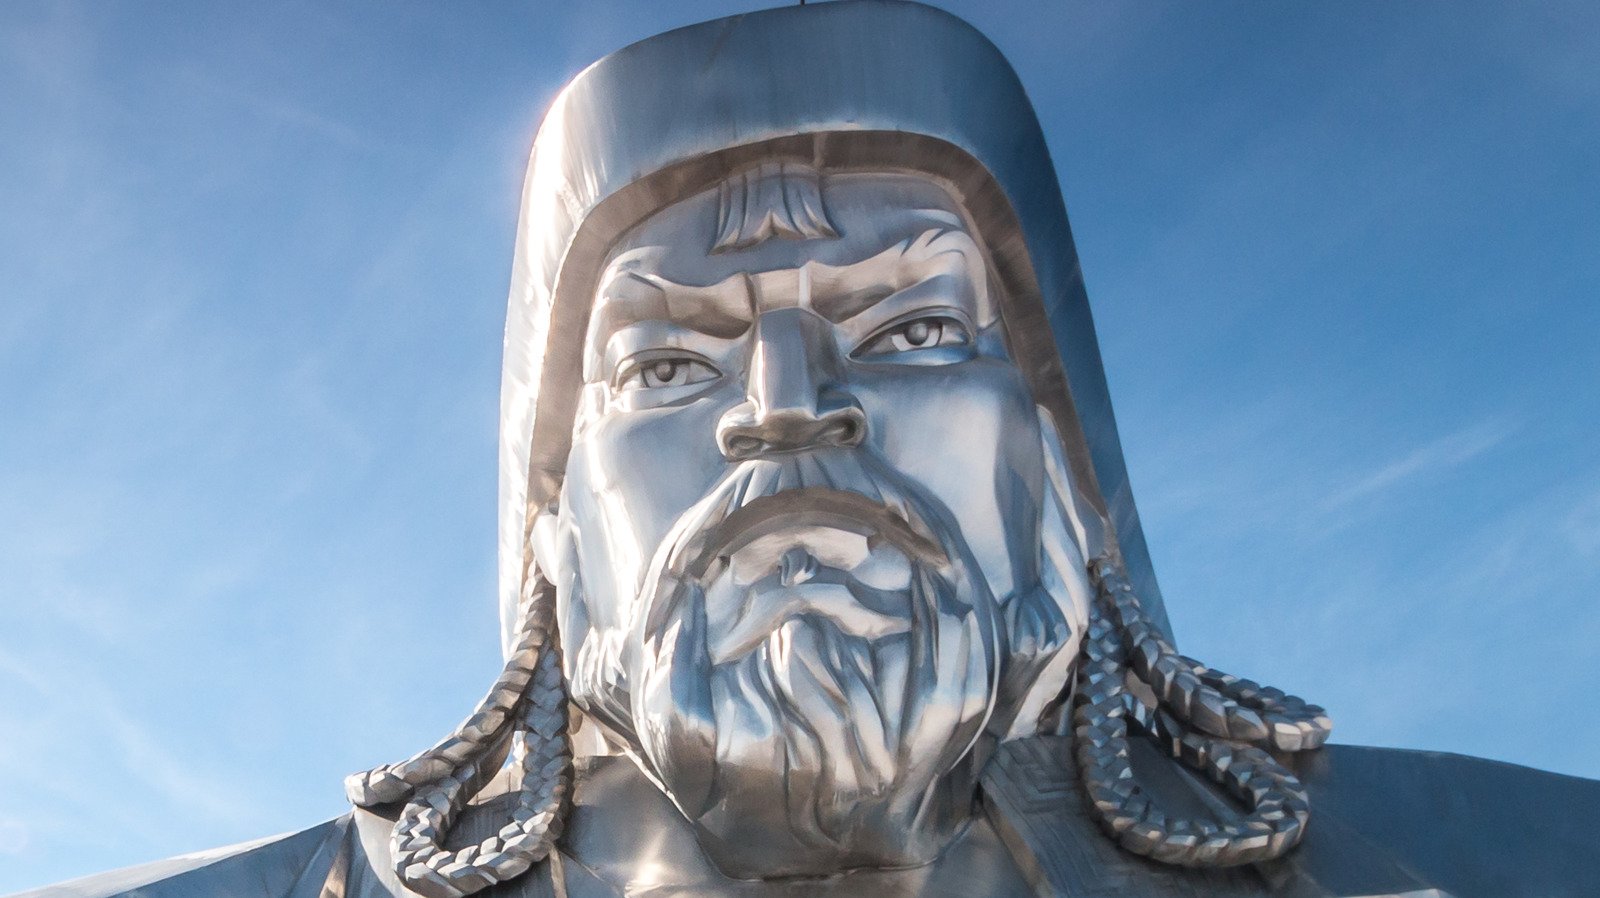 The Outrageous Number Of Deaths Genghis Khan Is Responsible For